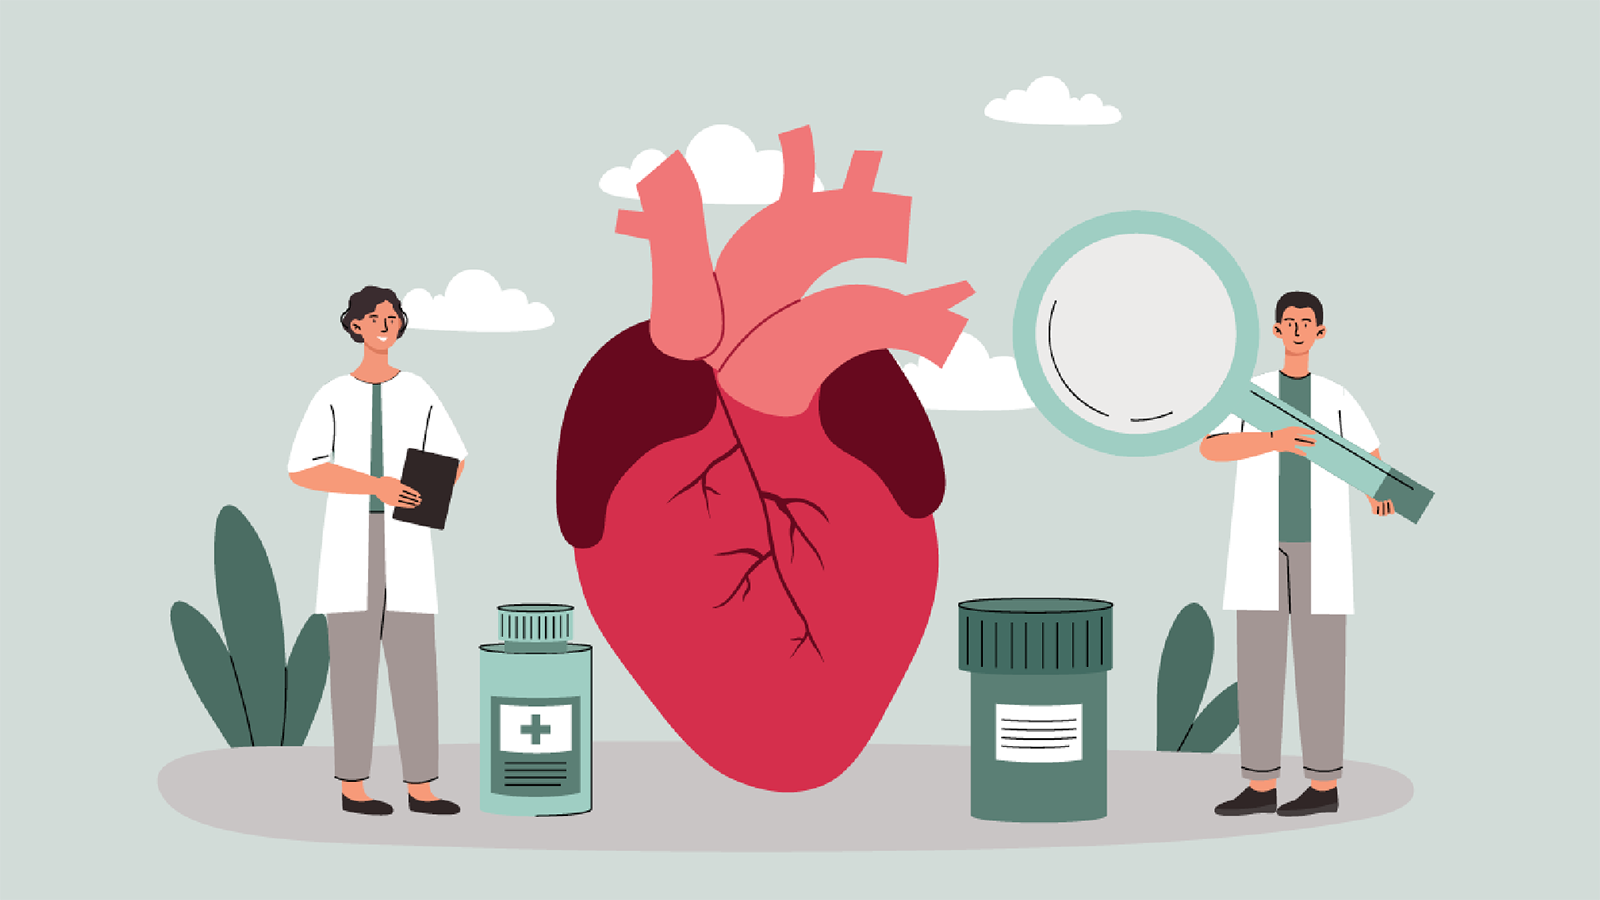 Vector cartoon illustration of two doctors - one of whom is holding big magnifying glass, pill bottles and a heart.